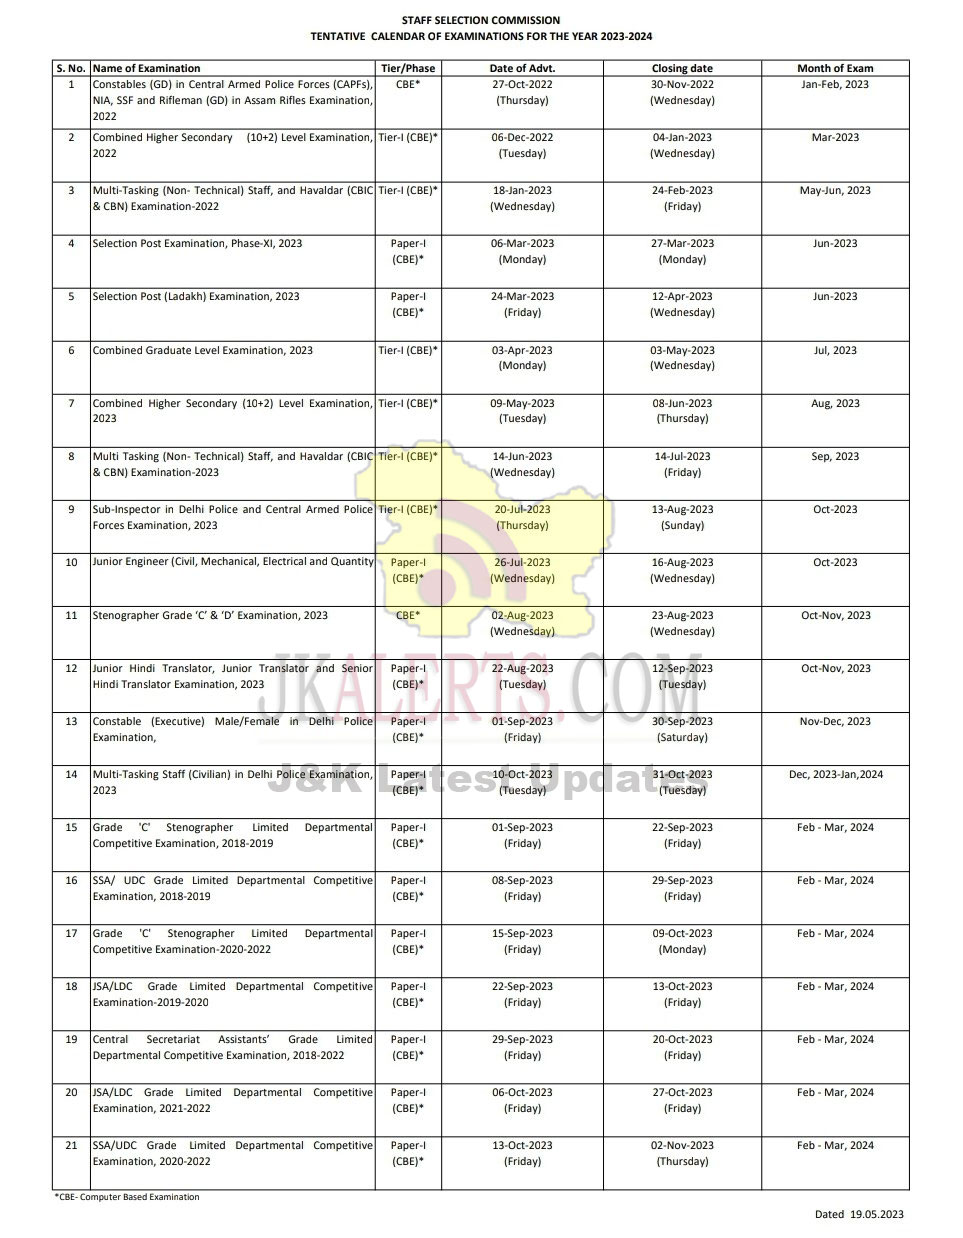 SSC Revised Calendar of Exams for the year 2023-2024.